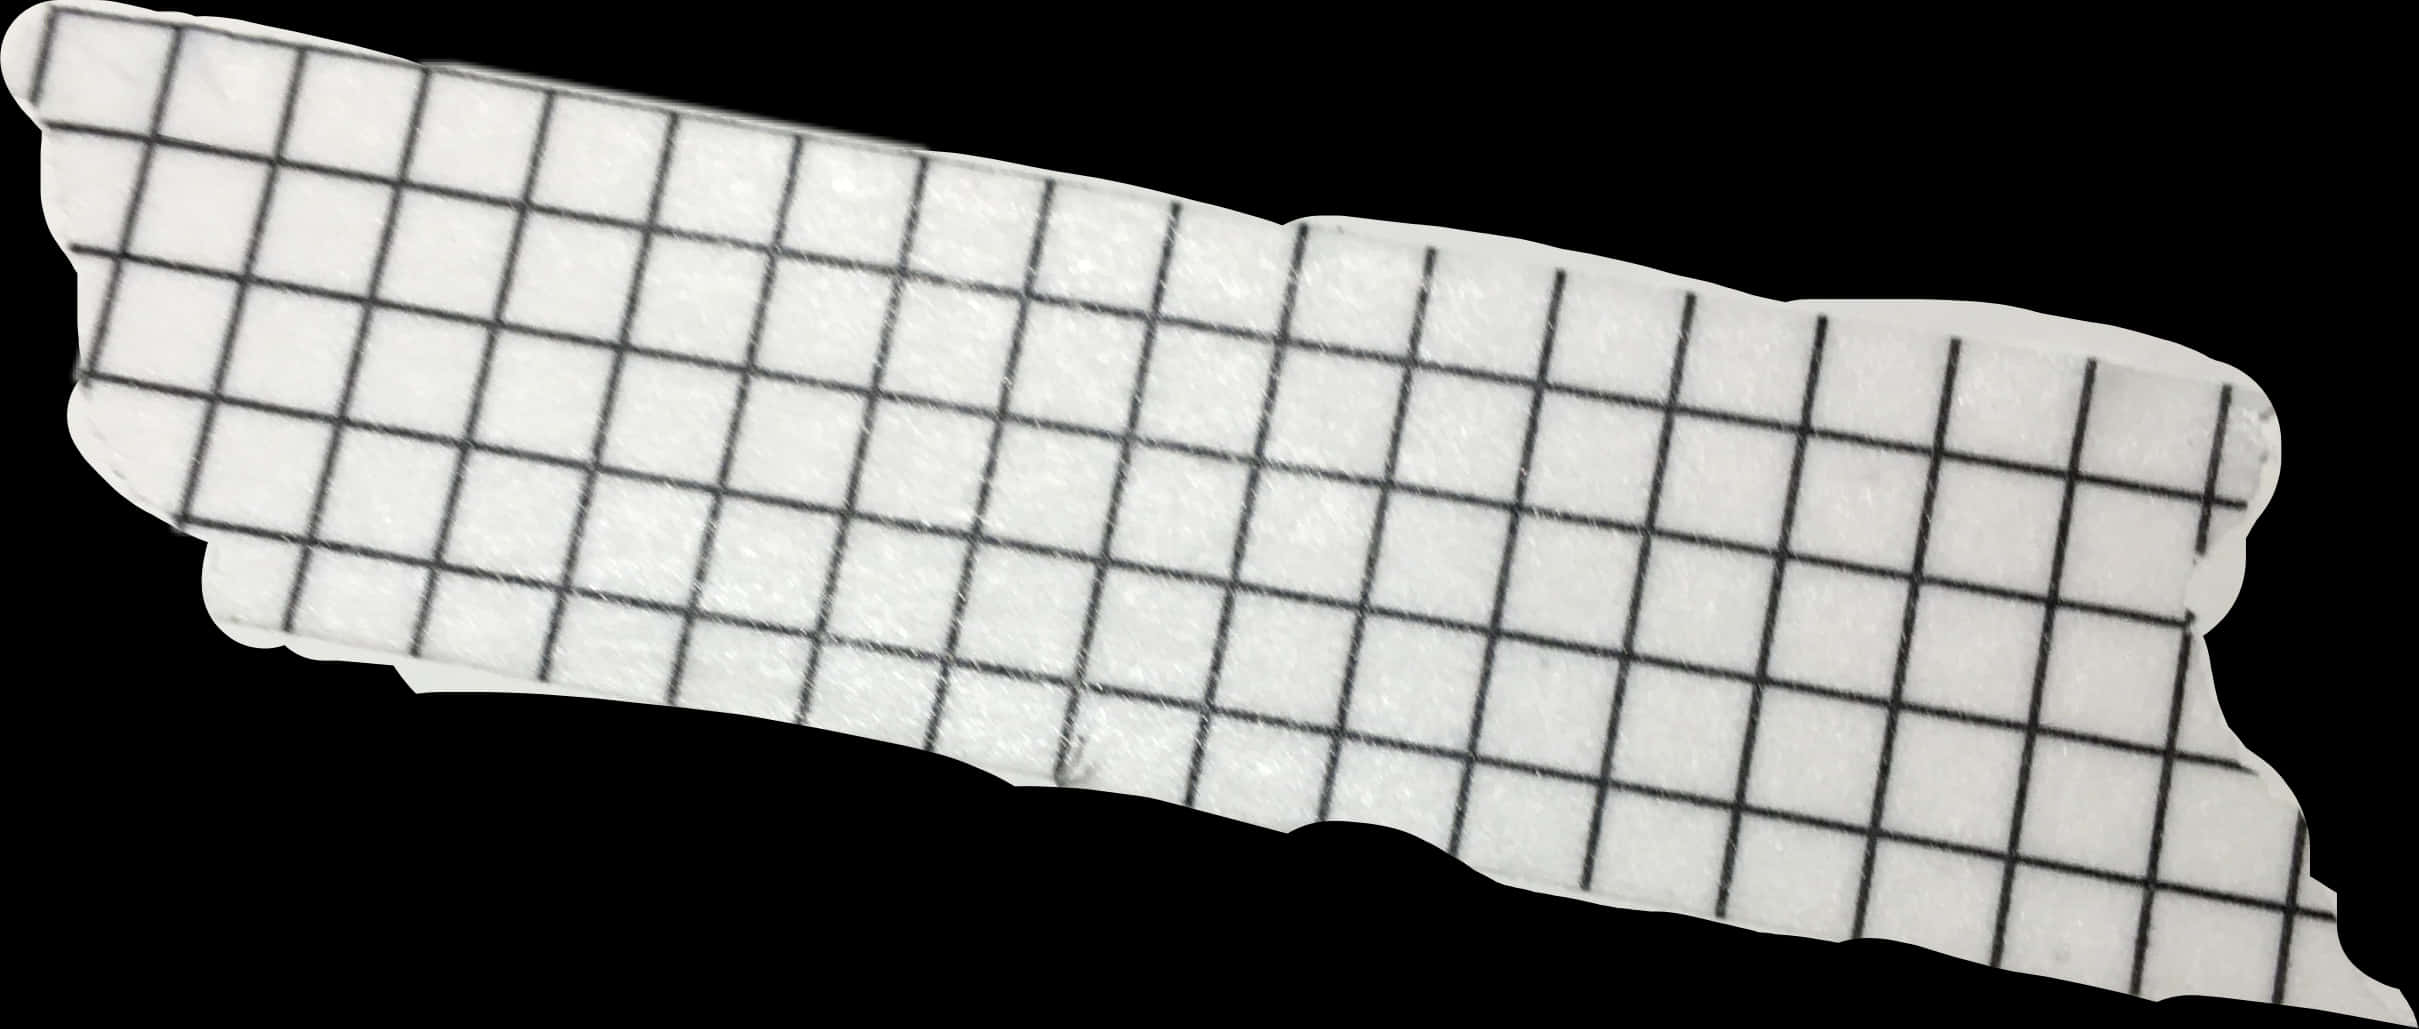 A Piece Of White Paper With Black Grids